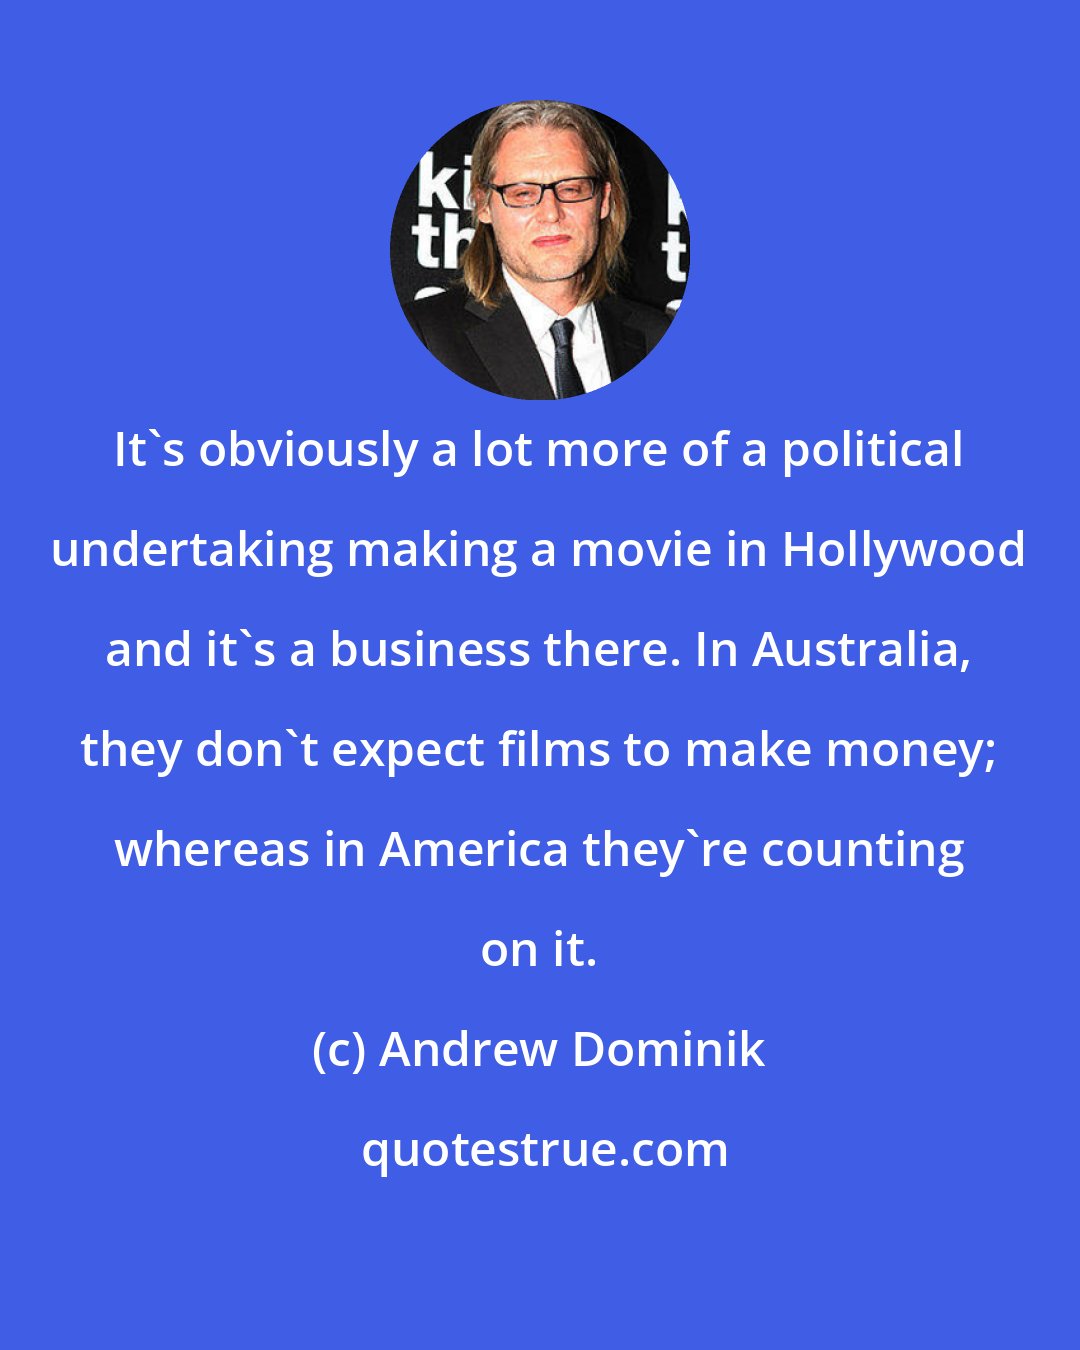 Andrew Dominik: It's obviously a lot more of a political undertaking making a movie in Hollywood and it's a business there. In Australia, they don't expect films to make money; whereas in America they're counting on it.